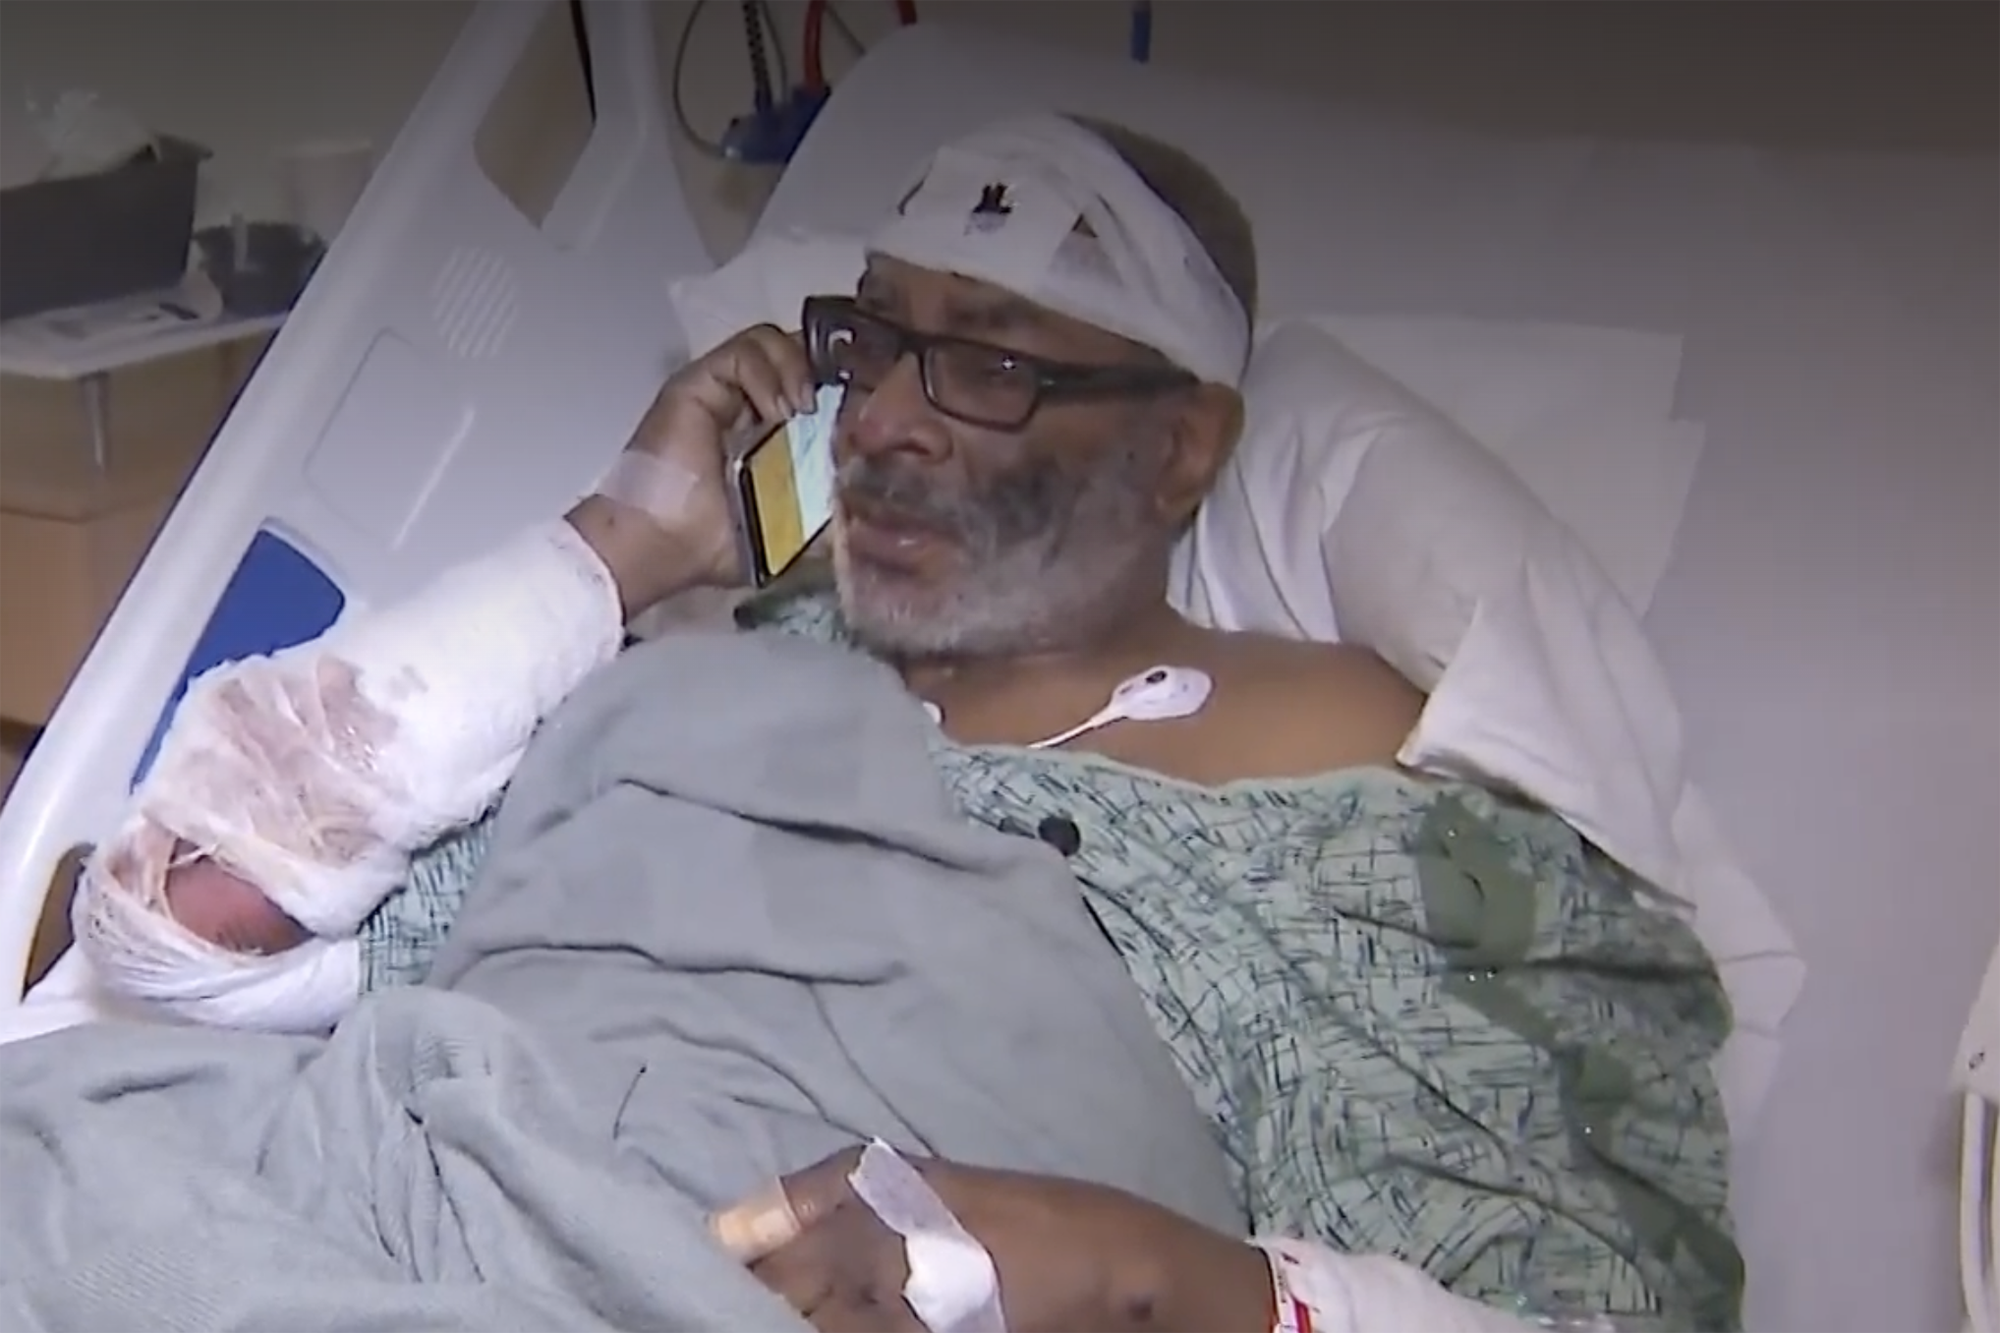 Video Of Former ESPN Sportscaster Cordell Patrick Seriously Injured After Getting ‘Kicked’ Out Of His RV On California Highway